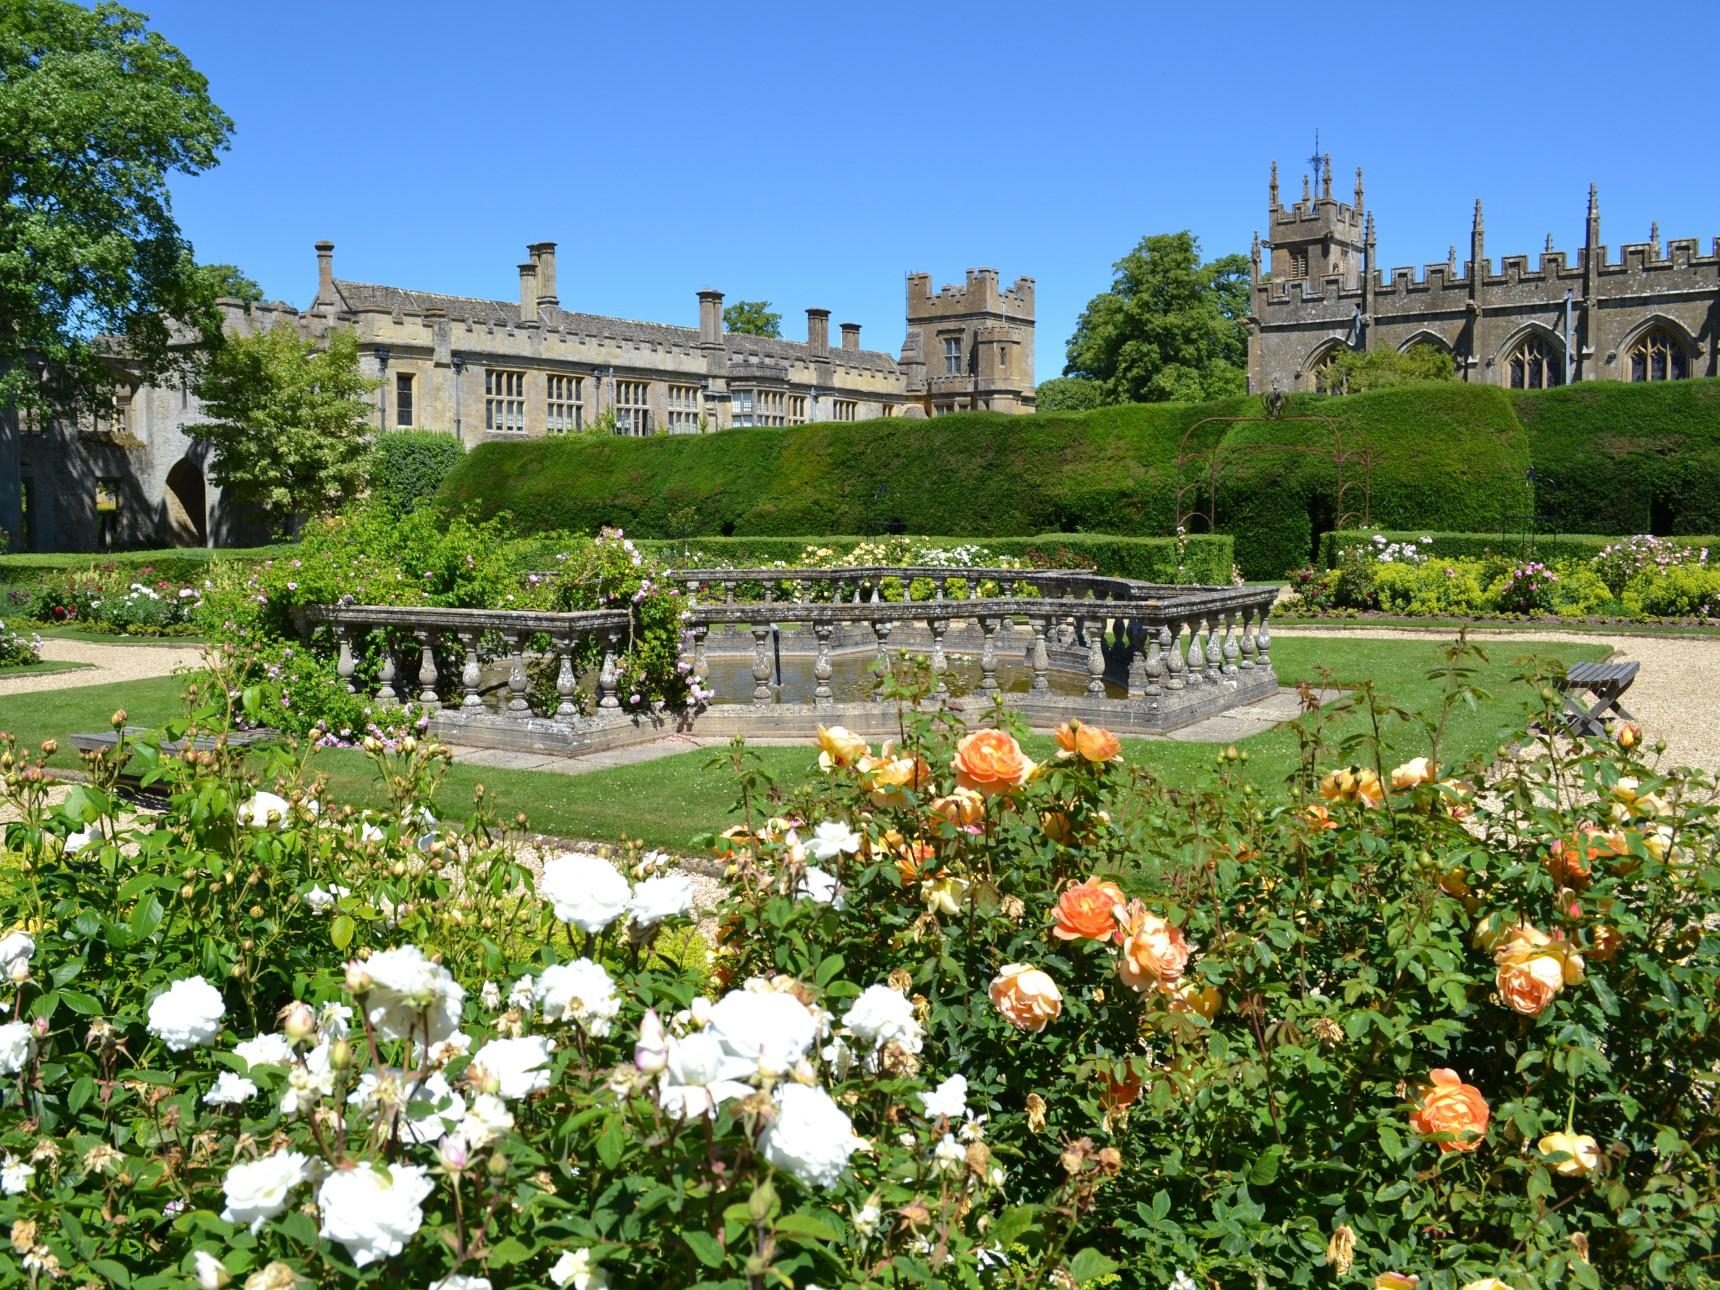 The Queen's Garden with white and orange roses showing views of castle and church